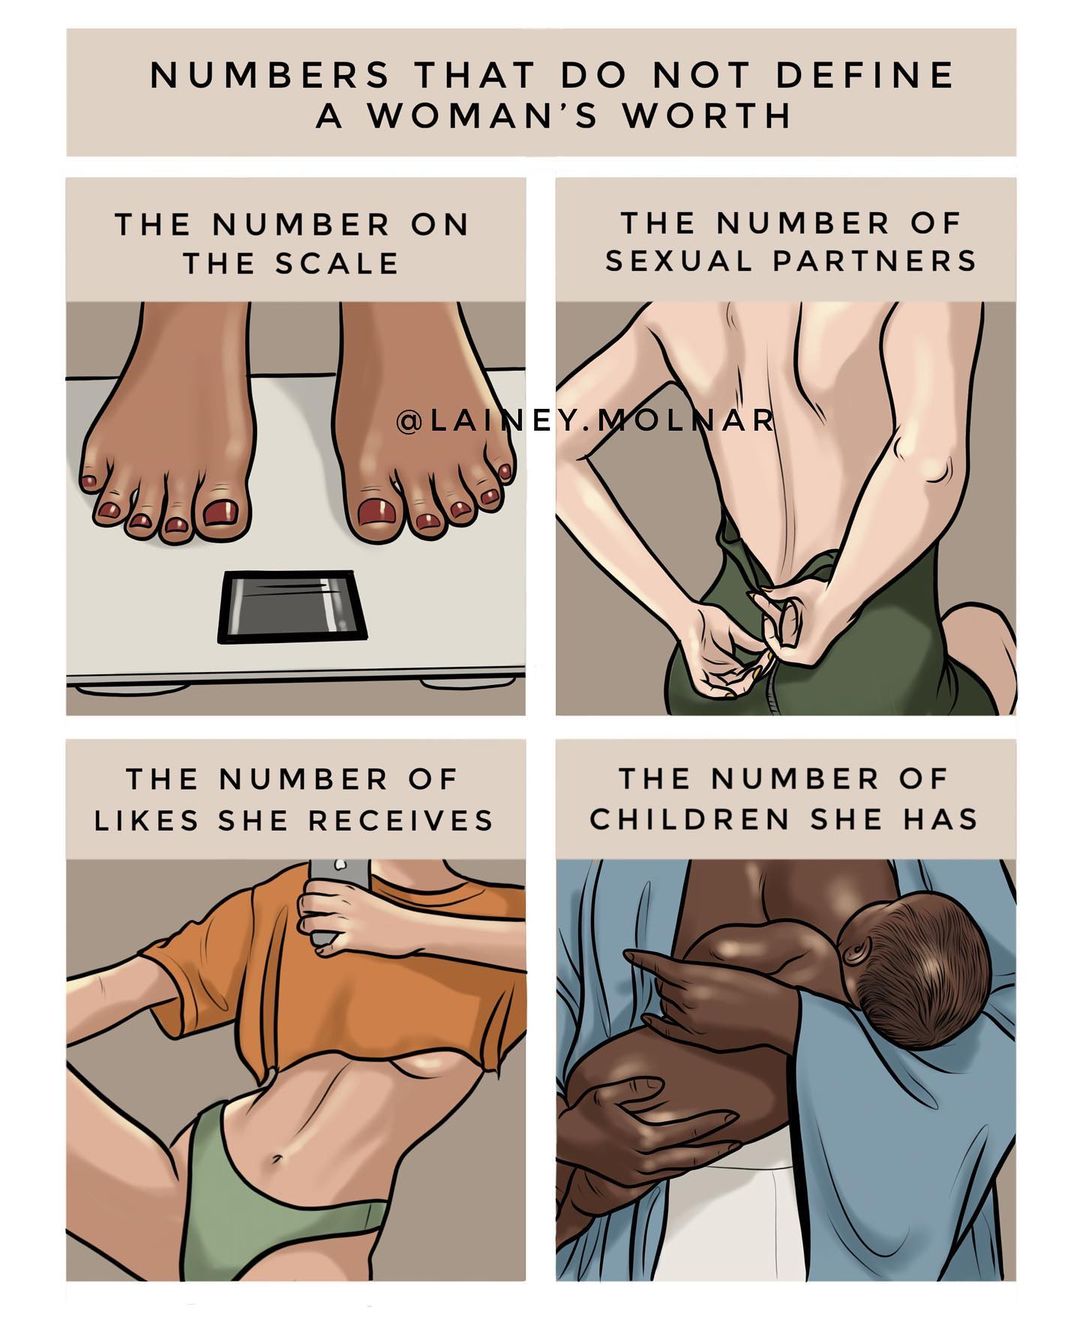 Artist Lainey Molnar creates an illustration showing the factors that DO NOT define a woman's worth.